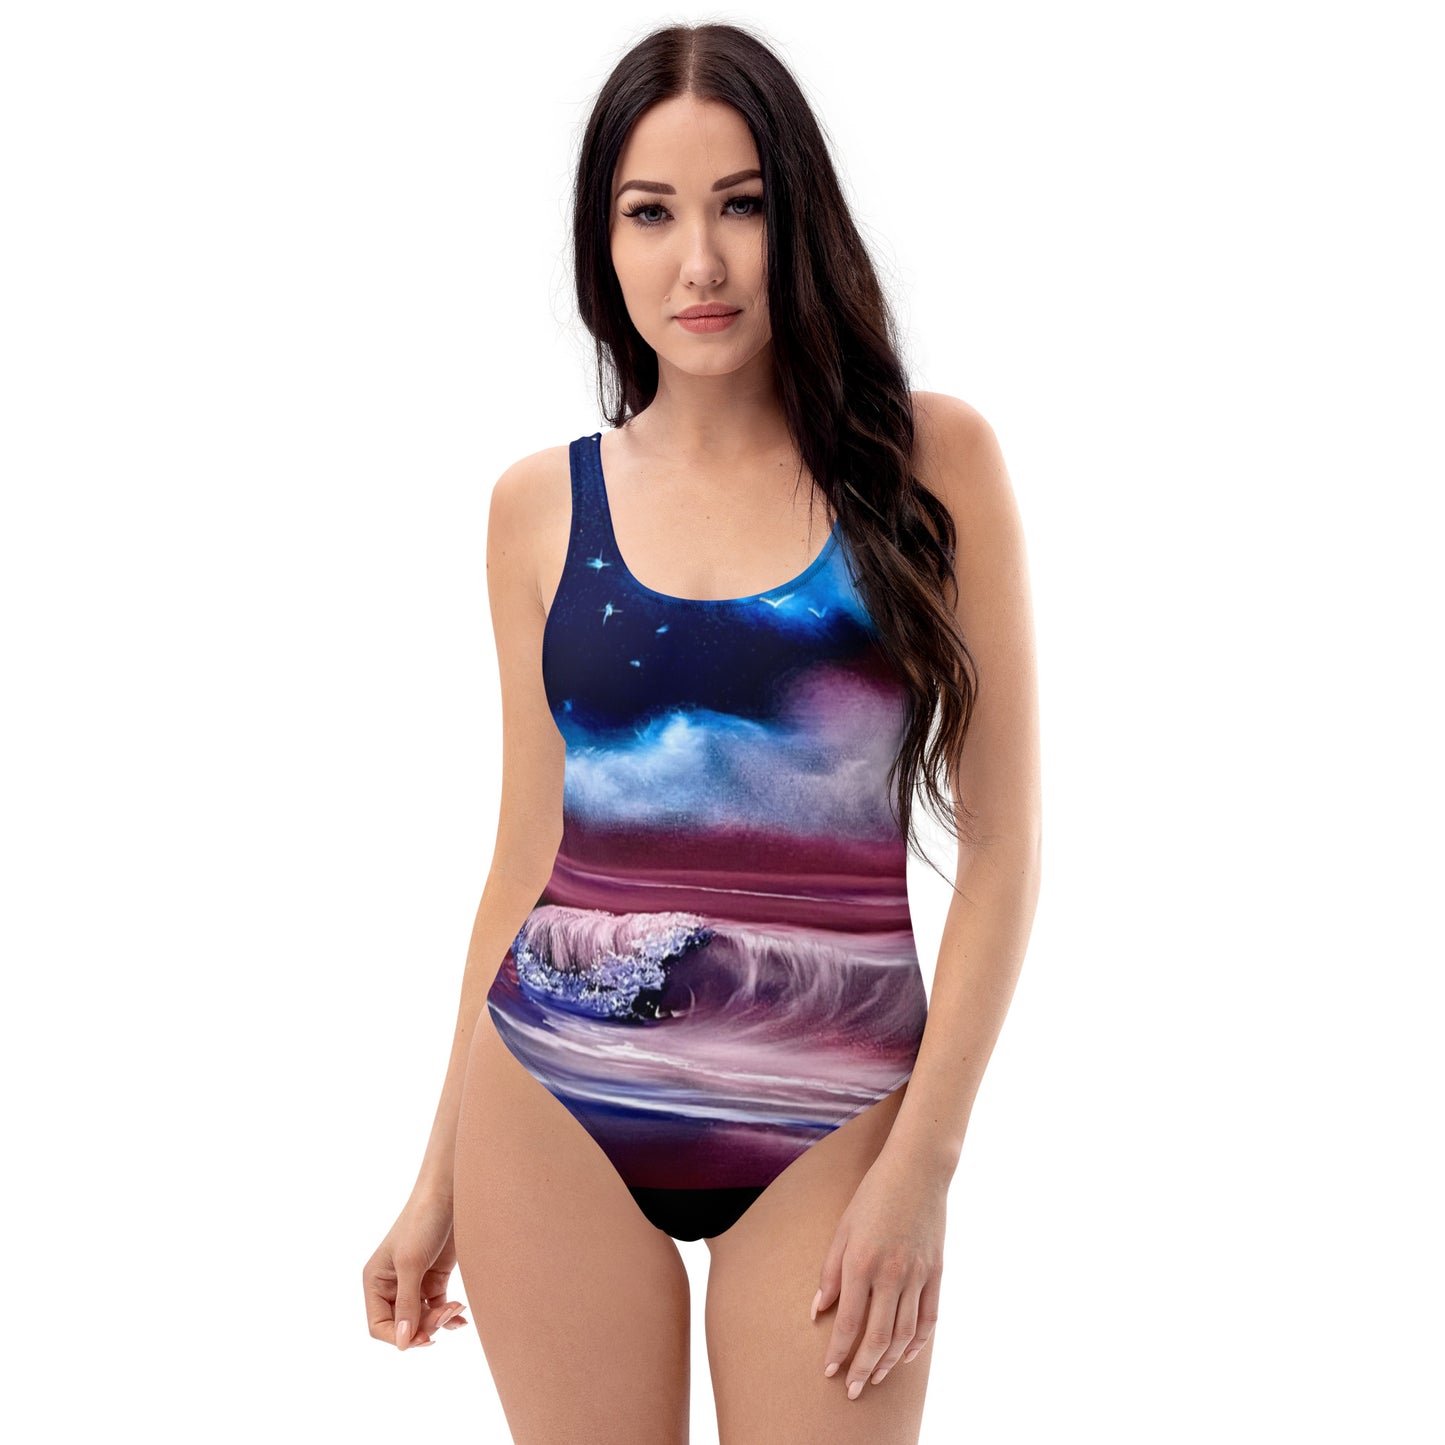 Swimwear - American Flag Women's One-Piece Swimsuit by PaintWithJosh